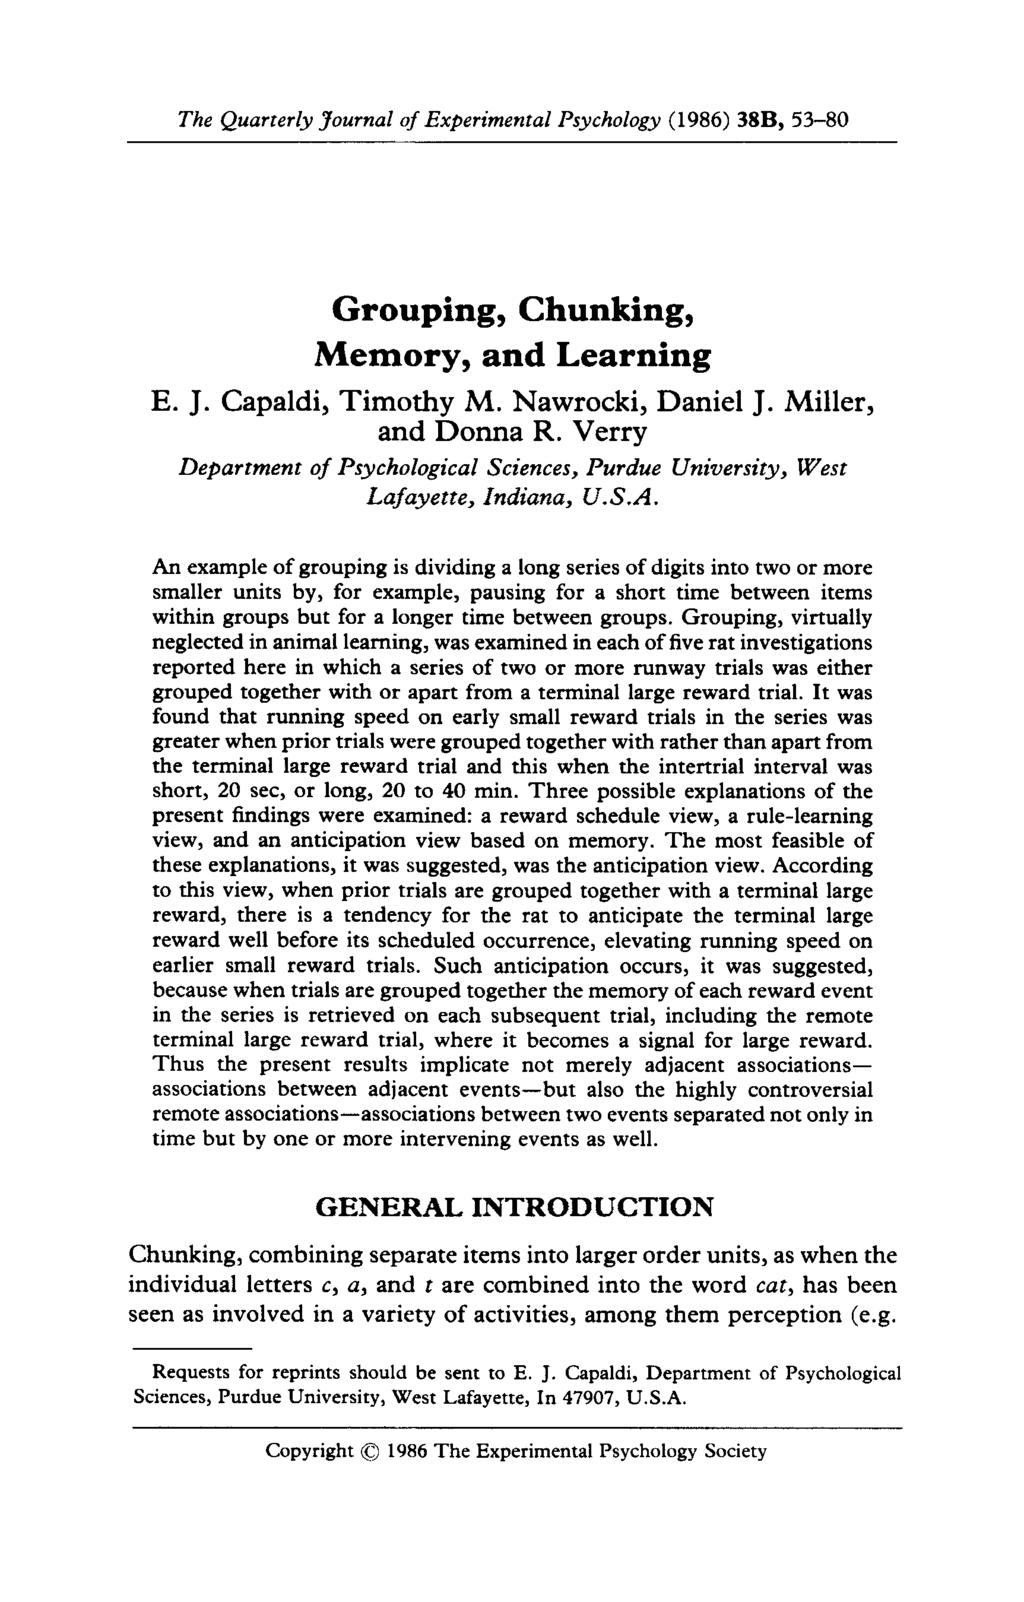 The Quarterly Journal of Experimental Psychology (1986) 38B, 53-8 Grouping, Chunking, Memory, and Learning E. J. Capaldi, Timothy M. Nawrocki, Daniel J. Miller, and Donna R.